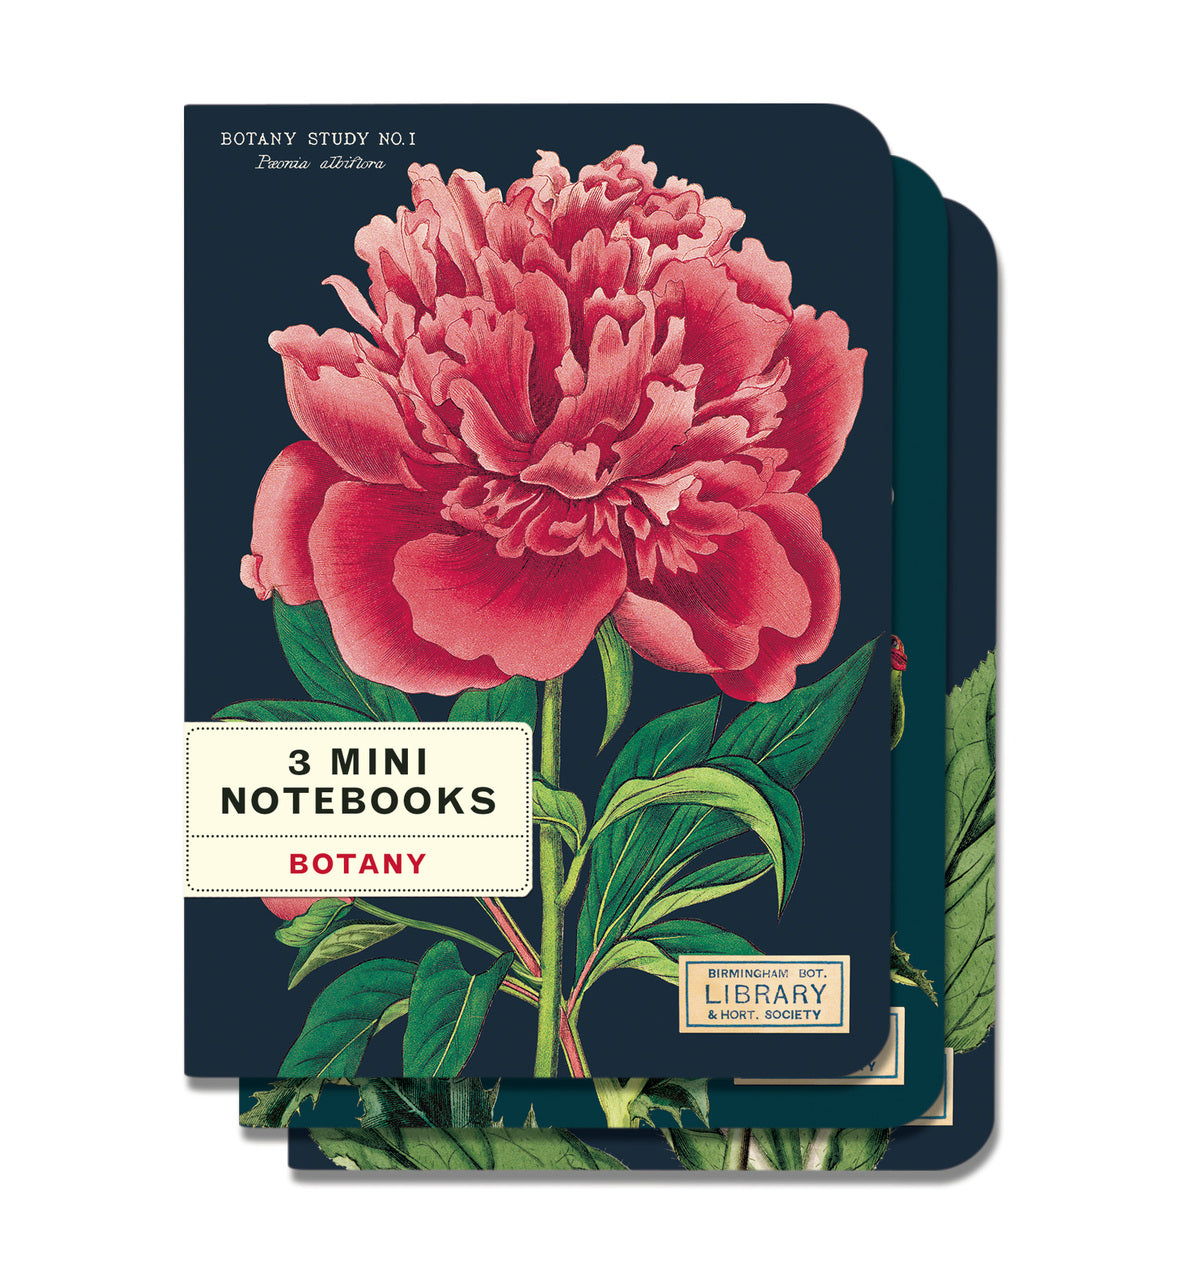 Bees & Honey Botany Mini Notebook set comes with three high quality notebooks featuring bright and colorful reproductions of vintage botanical images.